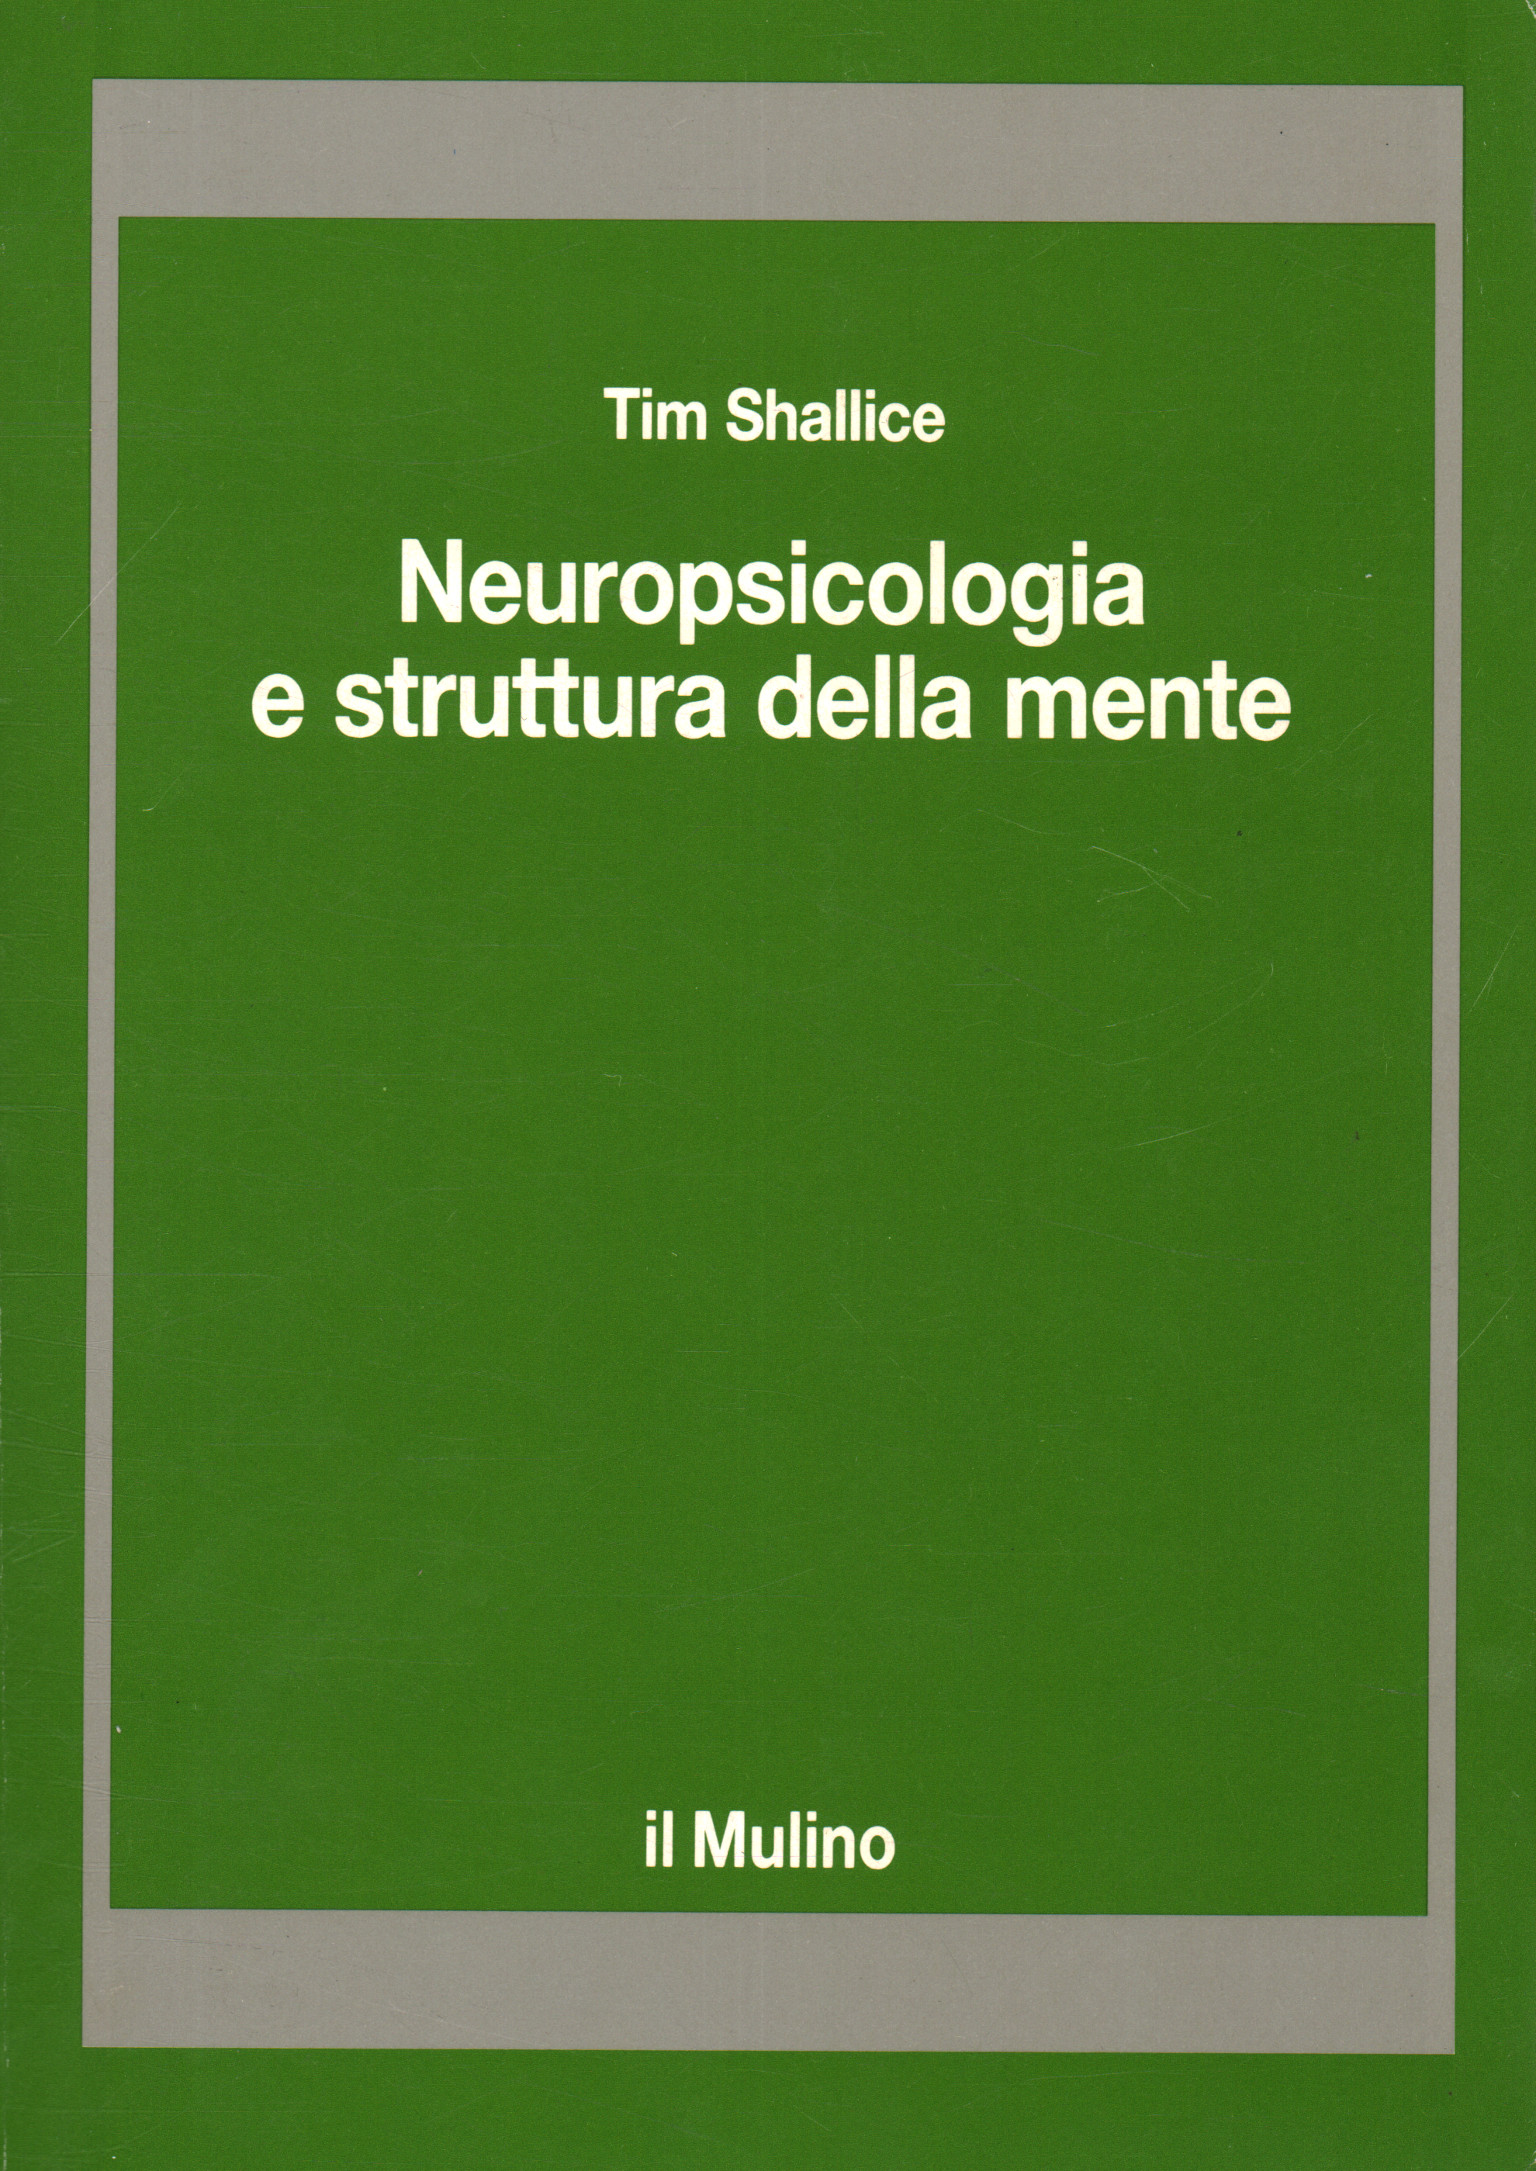 Neuropsychology and structure of mind